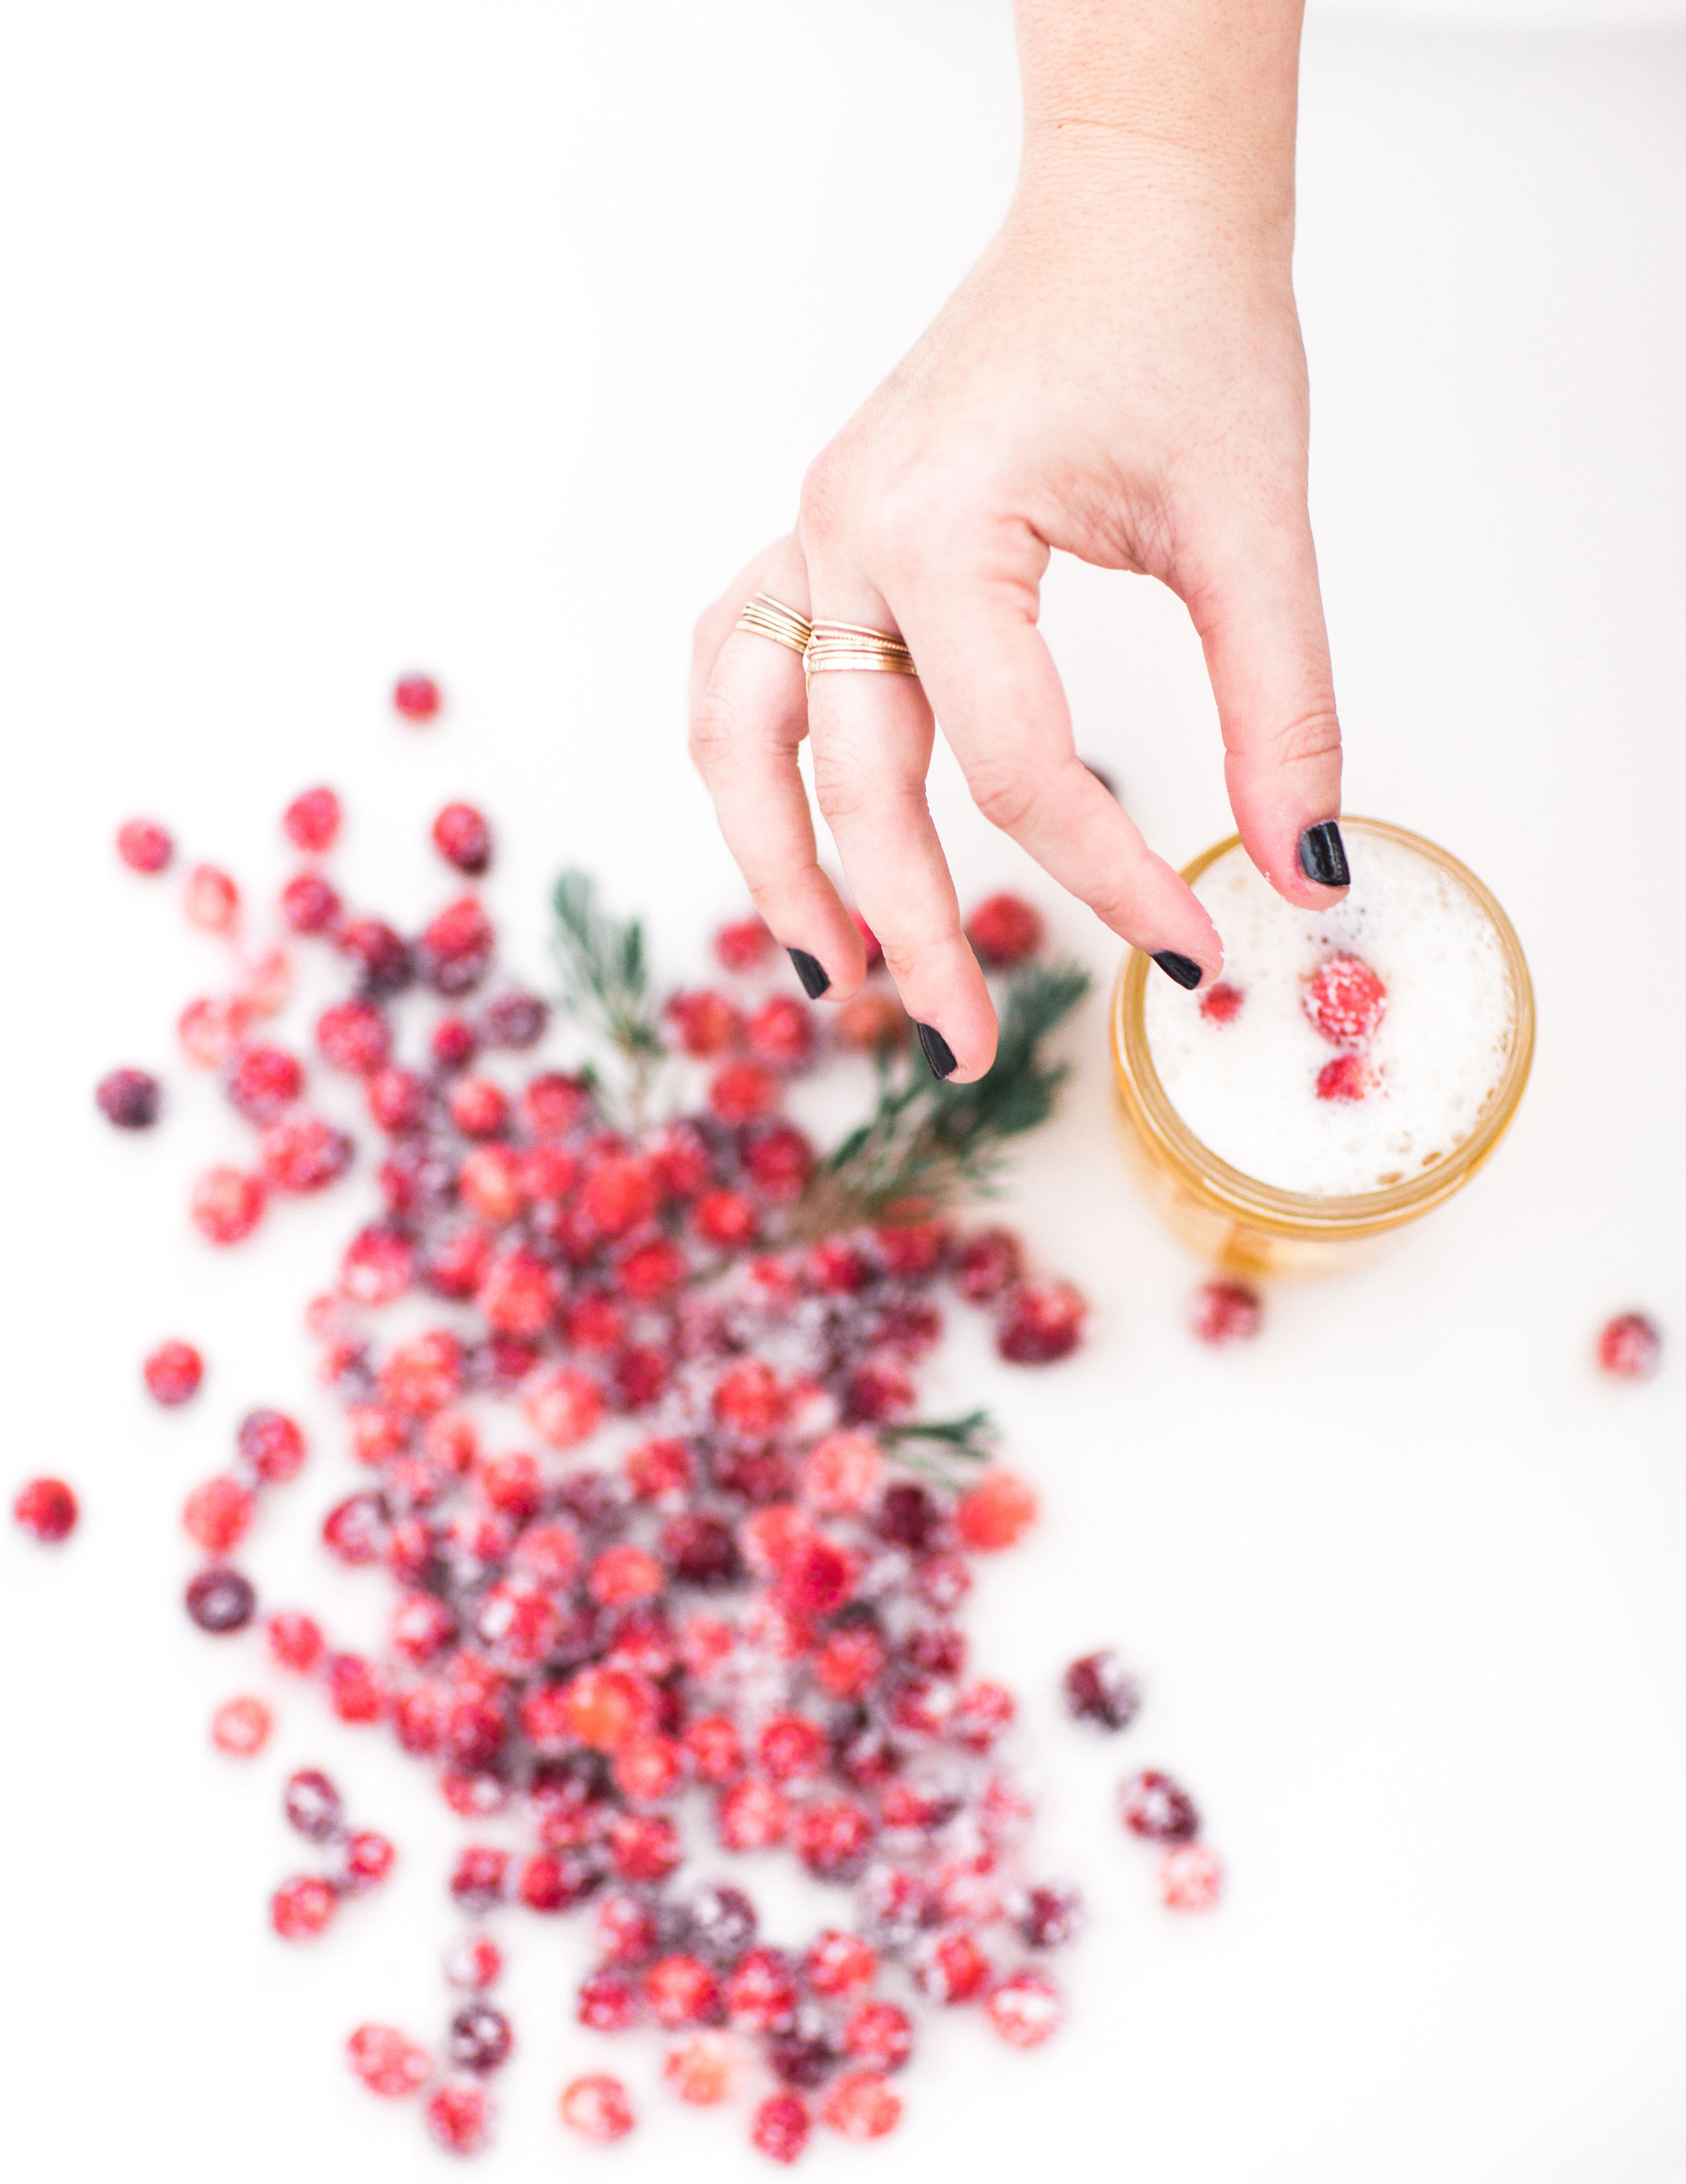 How to make sparkling sugared cranberries for the Holidays that are super simple to make (just two ingredients!) and perfect for dressing up desserts, cheese boards, and cocktails! | glitterinc.com | @glitterinc